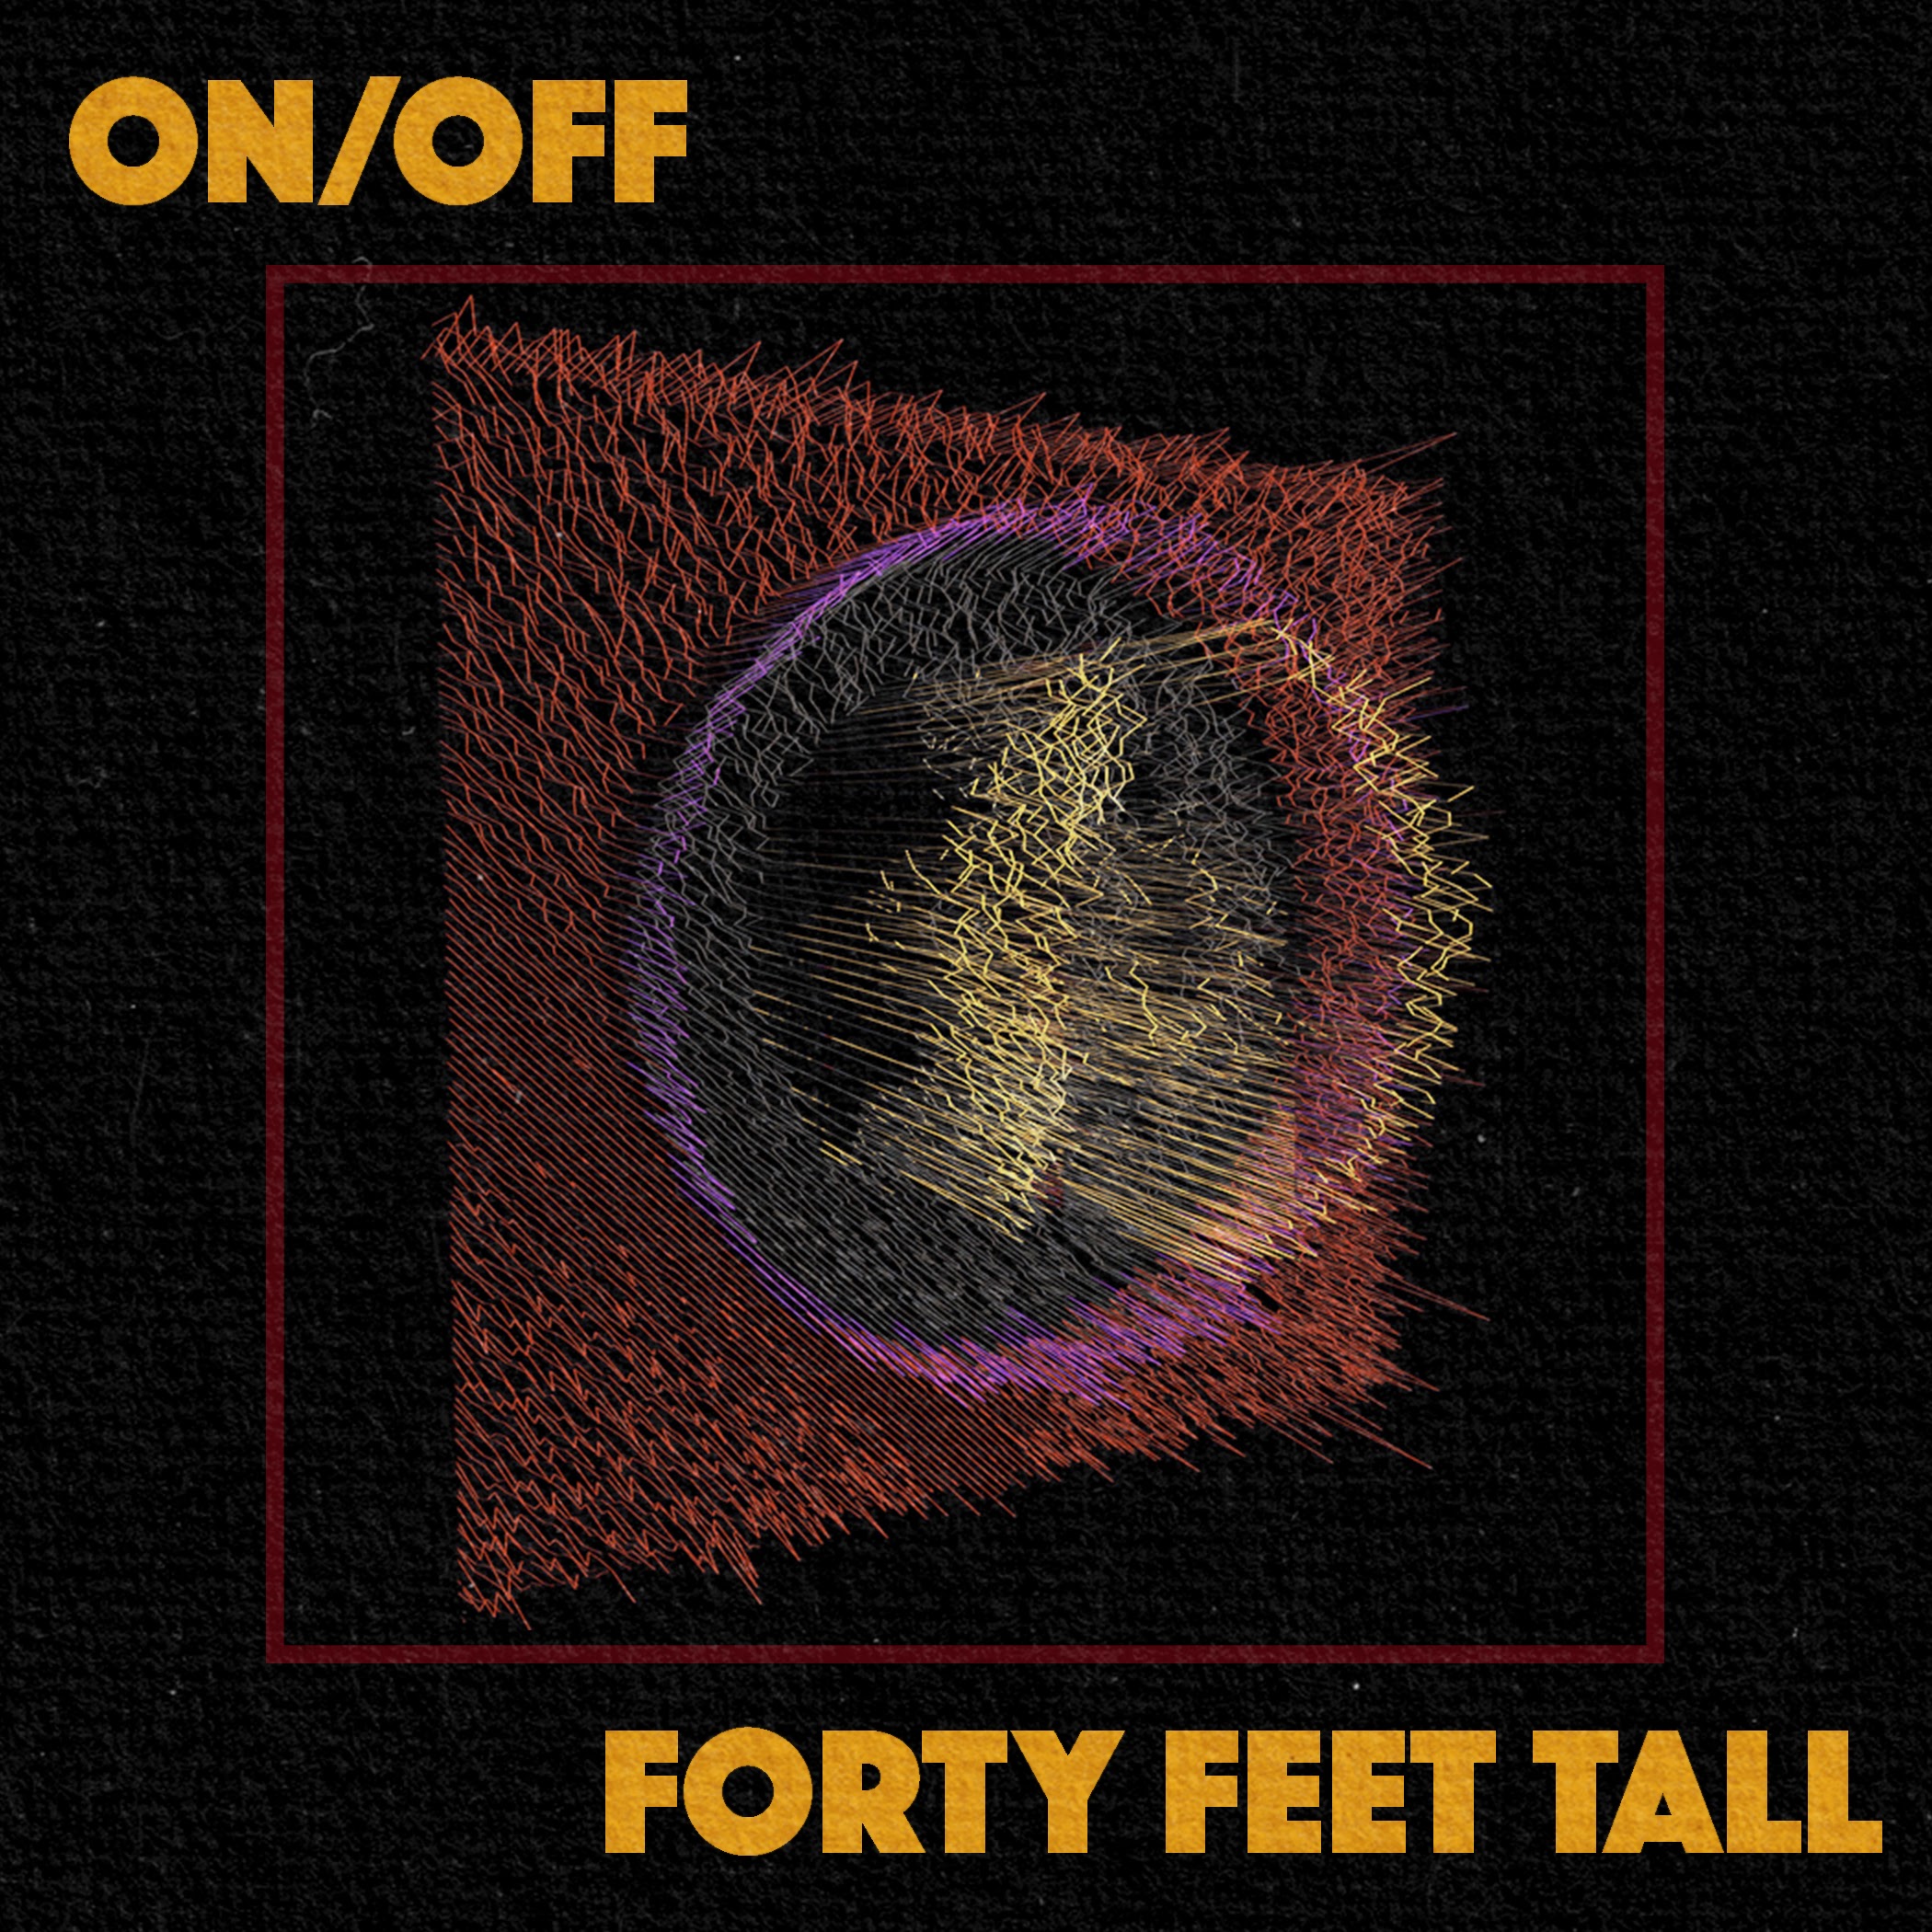 FORTY FEET TALL DOUBLE RELEASE- "ON/OFF"